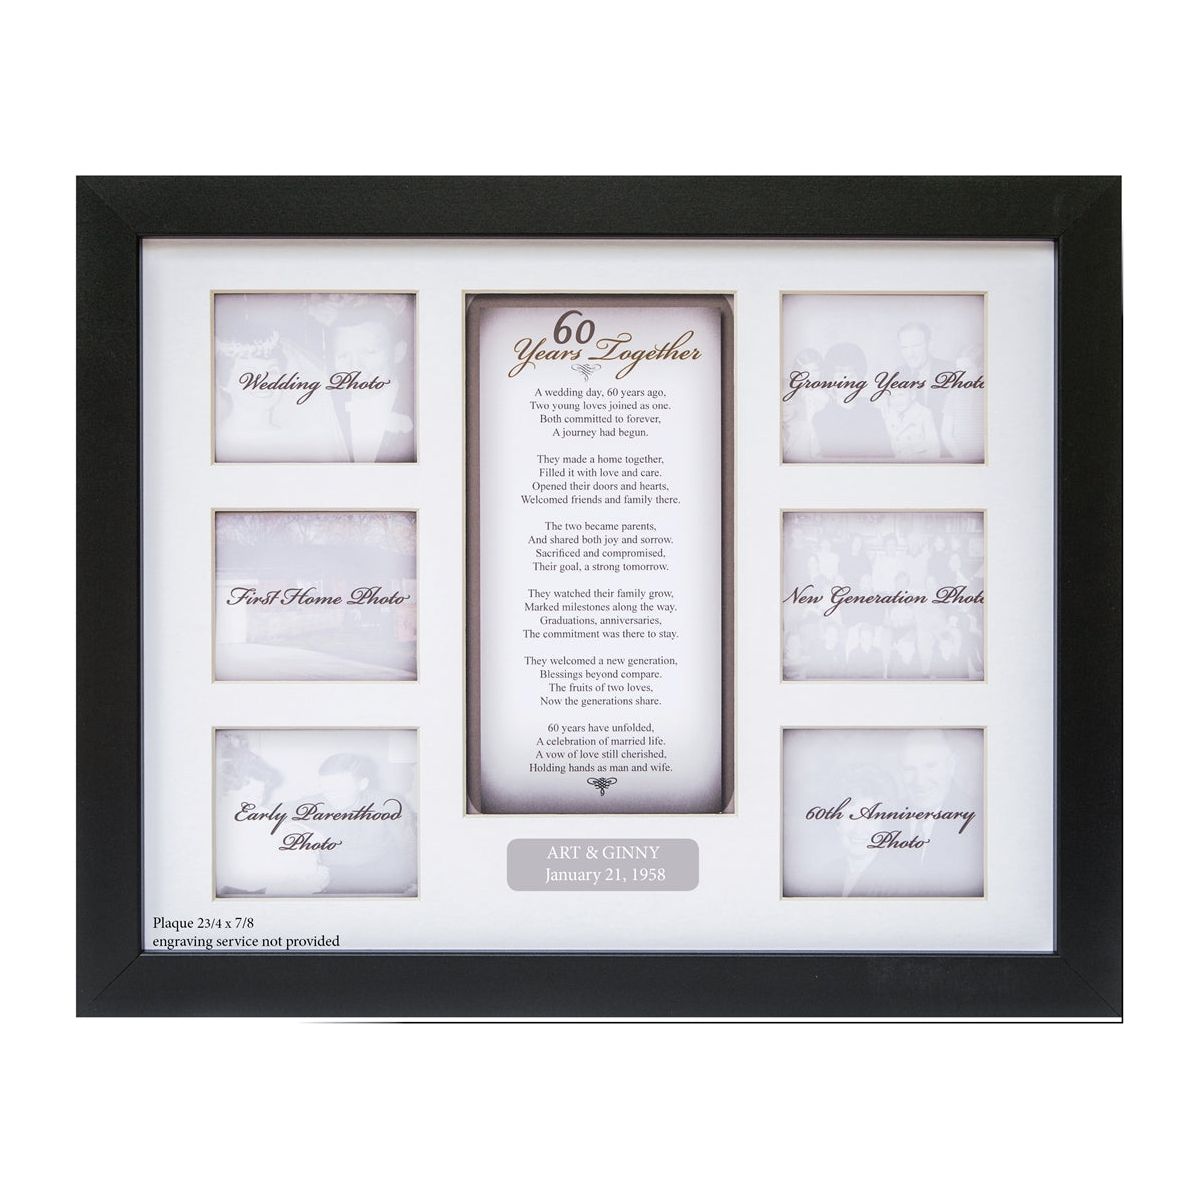 60 Years Together frame with an example of the optional engravable plaque (2 3/4&quot; x 7/8&quot;) engraving  service not provided